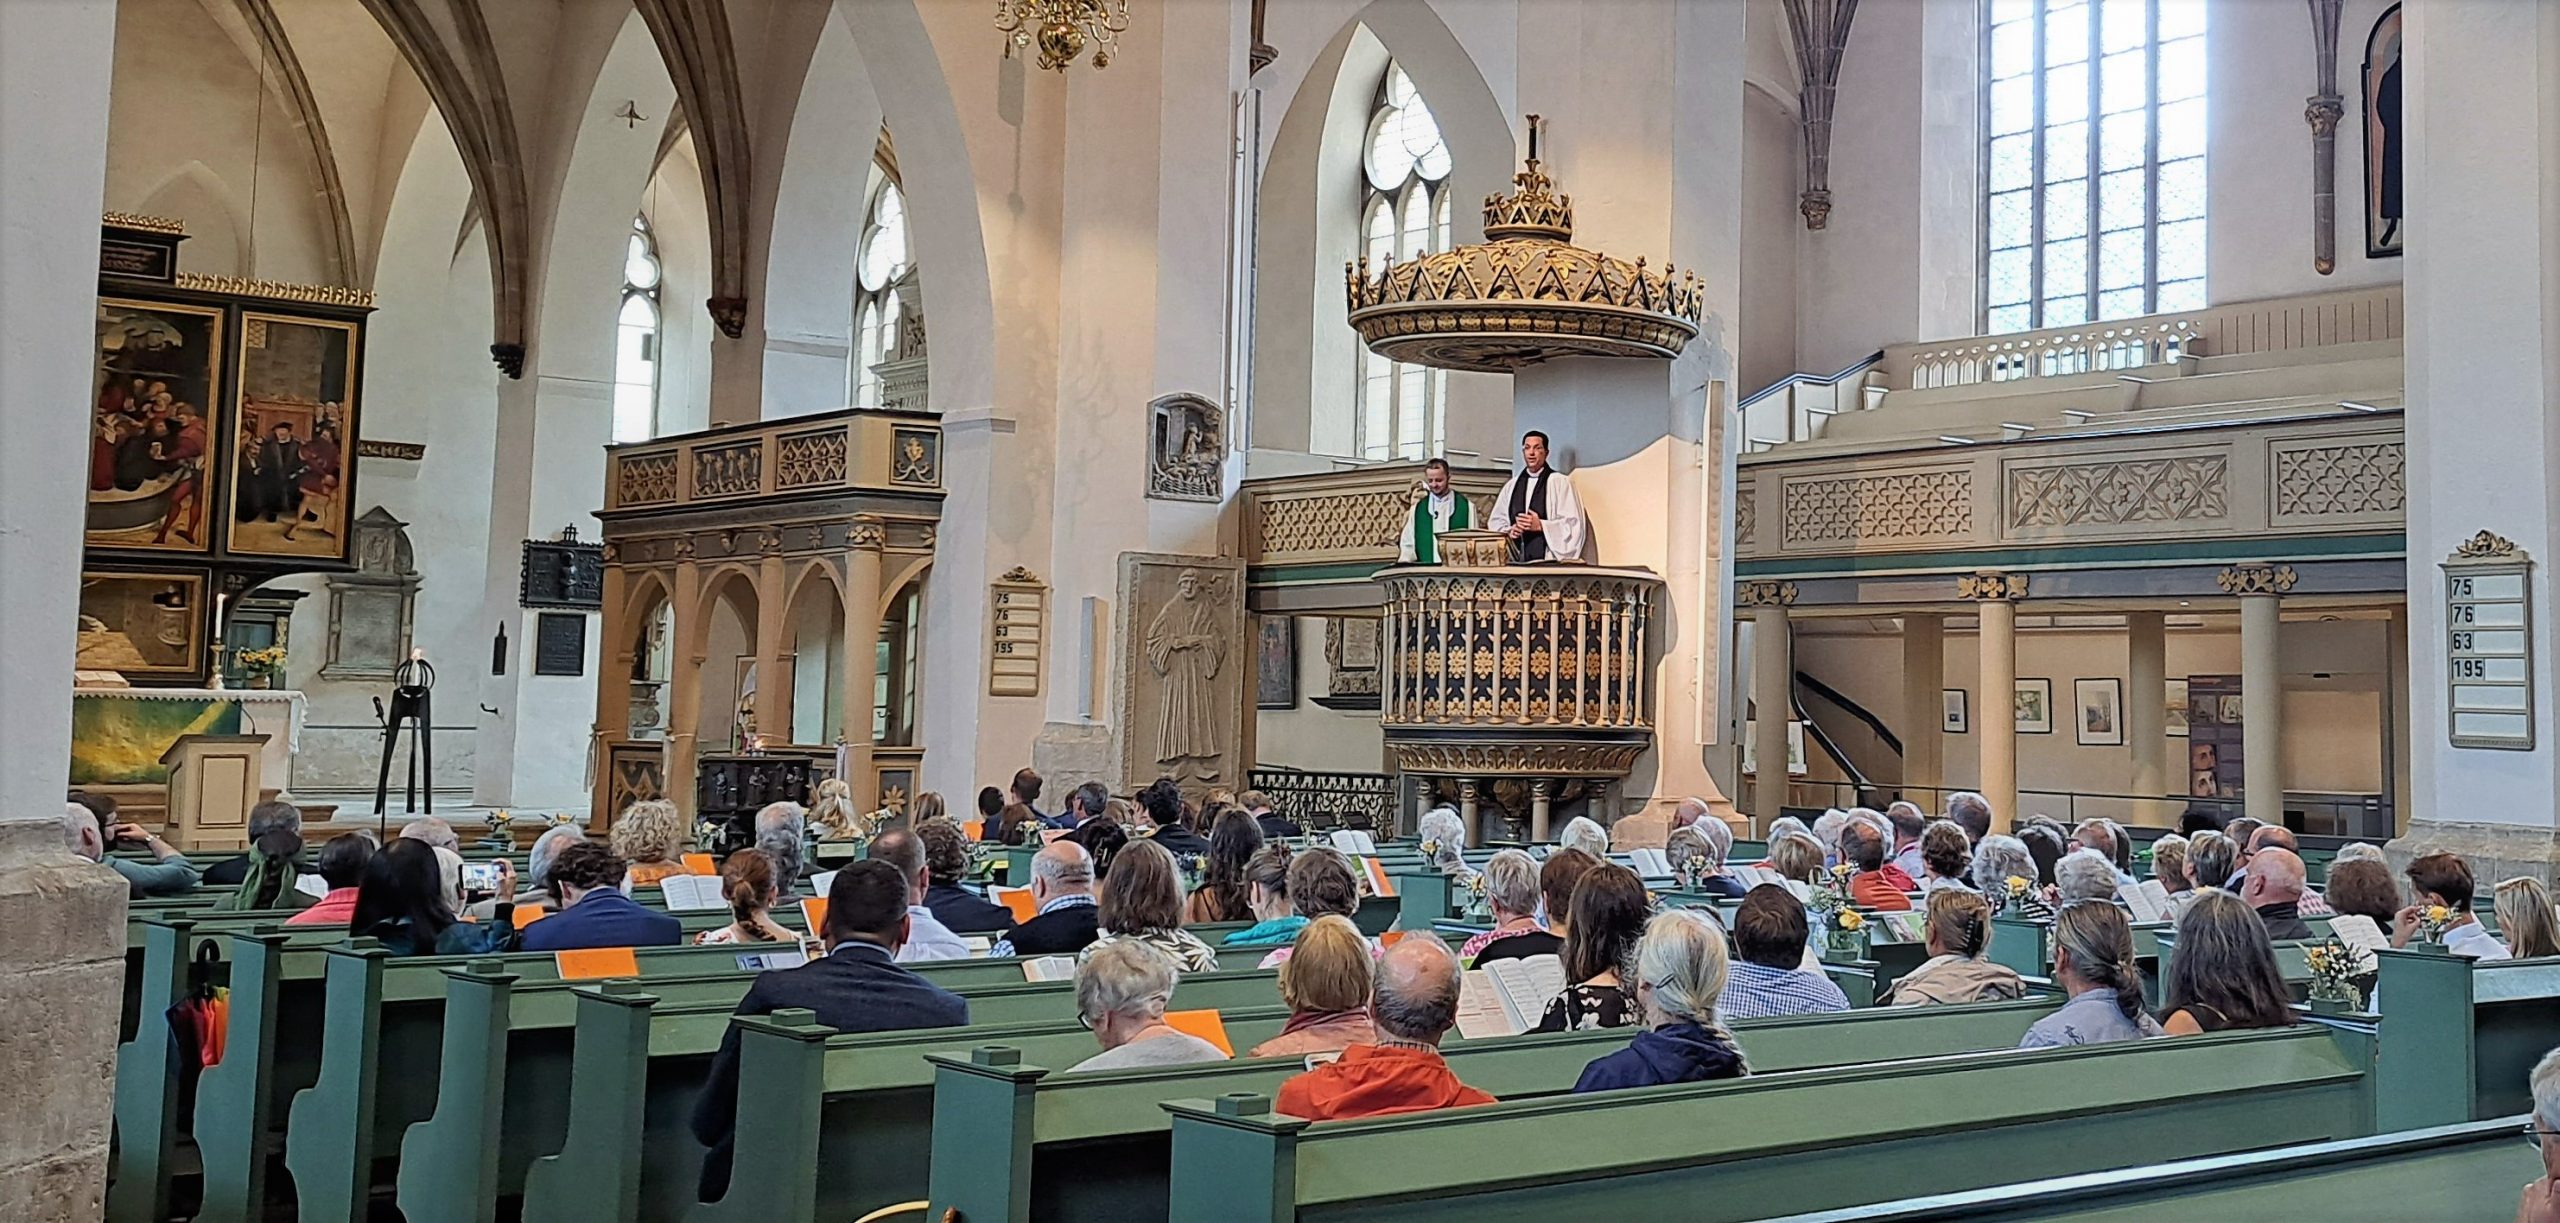 July 2: WCRS director John Fonville preaches in Luther’s church in Wittenberg